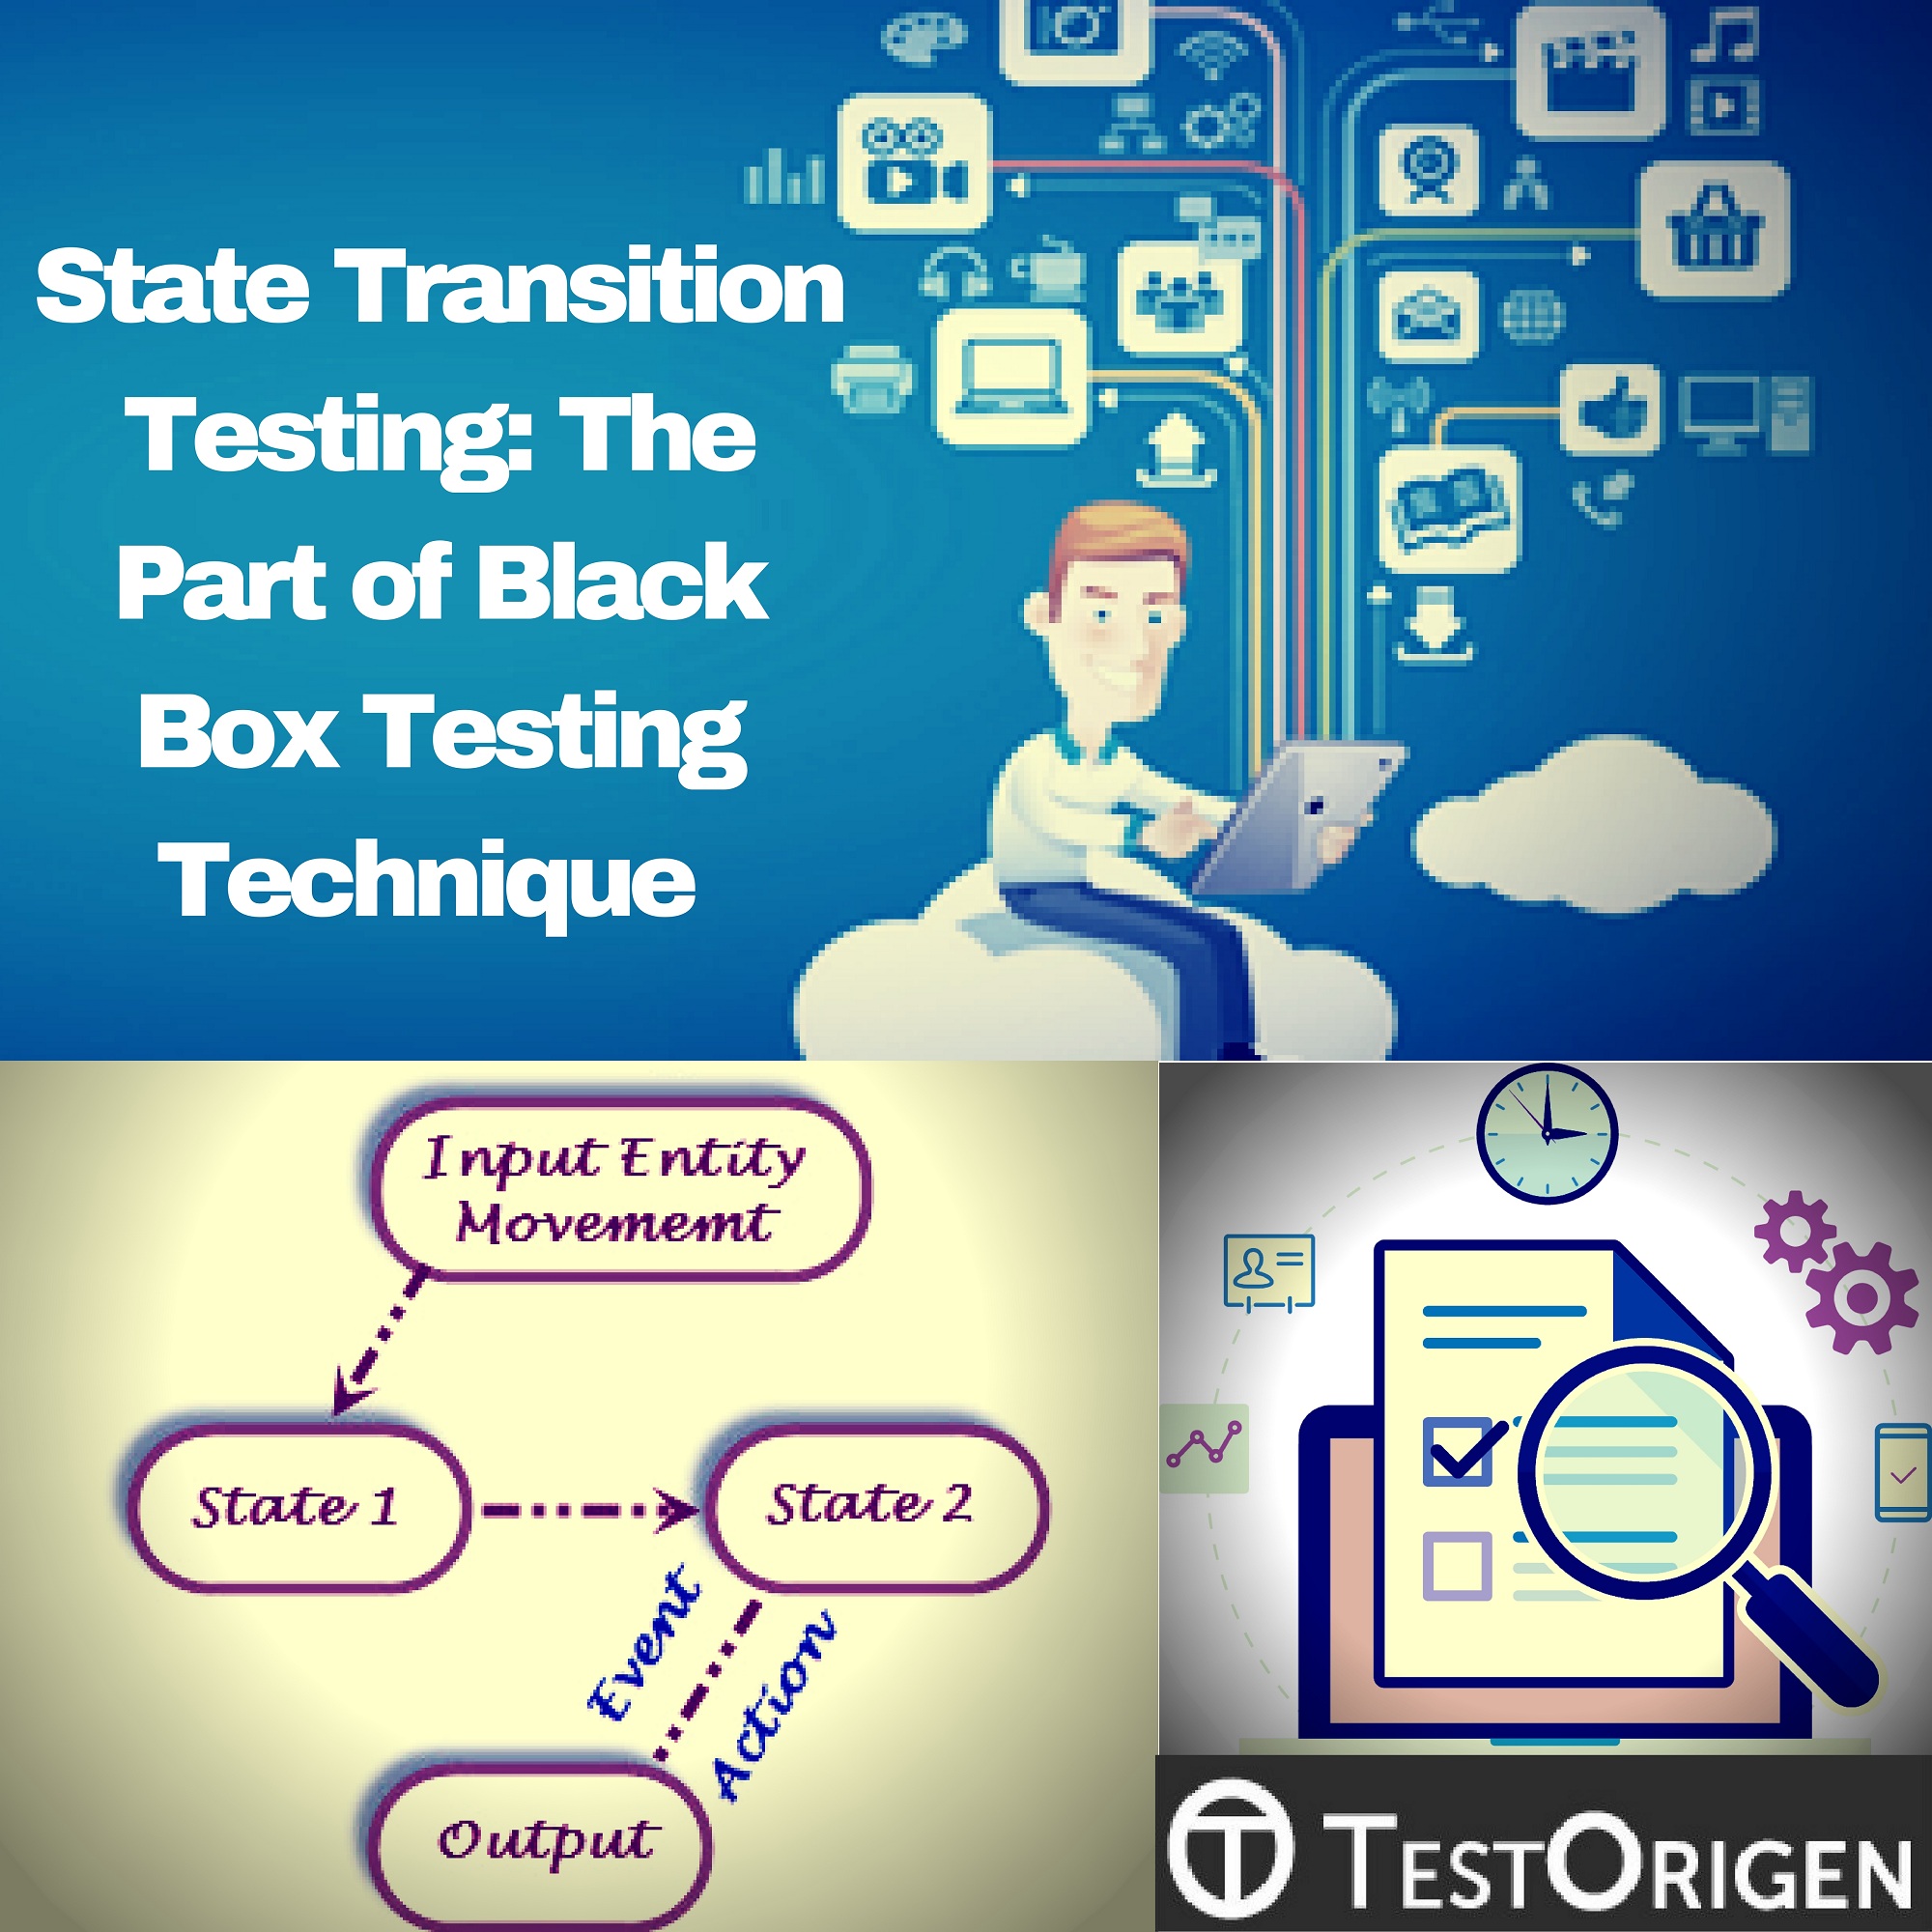 State Transition Testing: The Part of Black Box Testing Technique